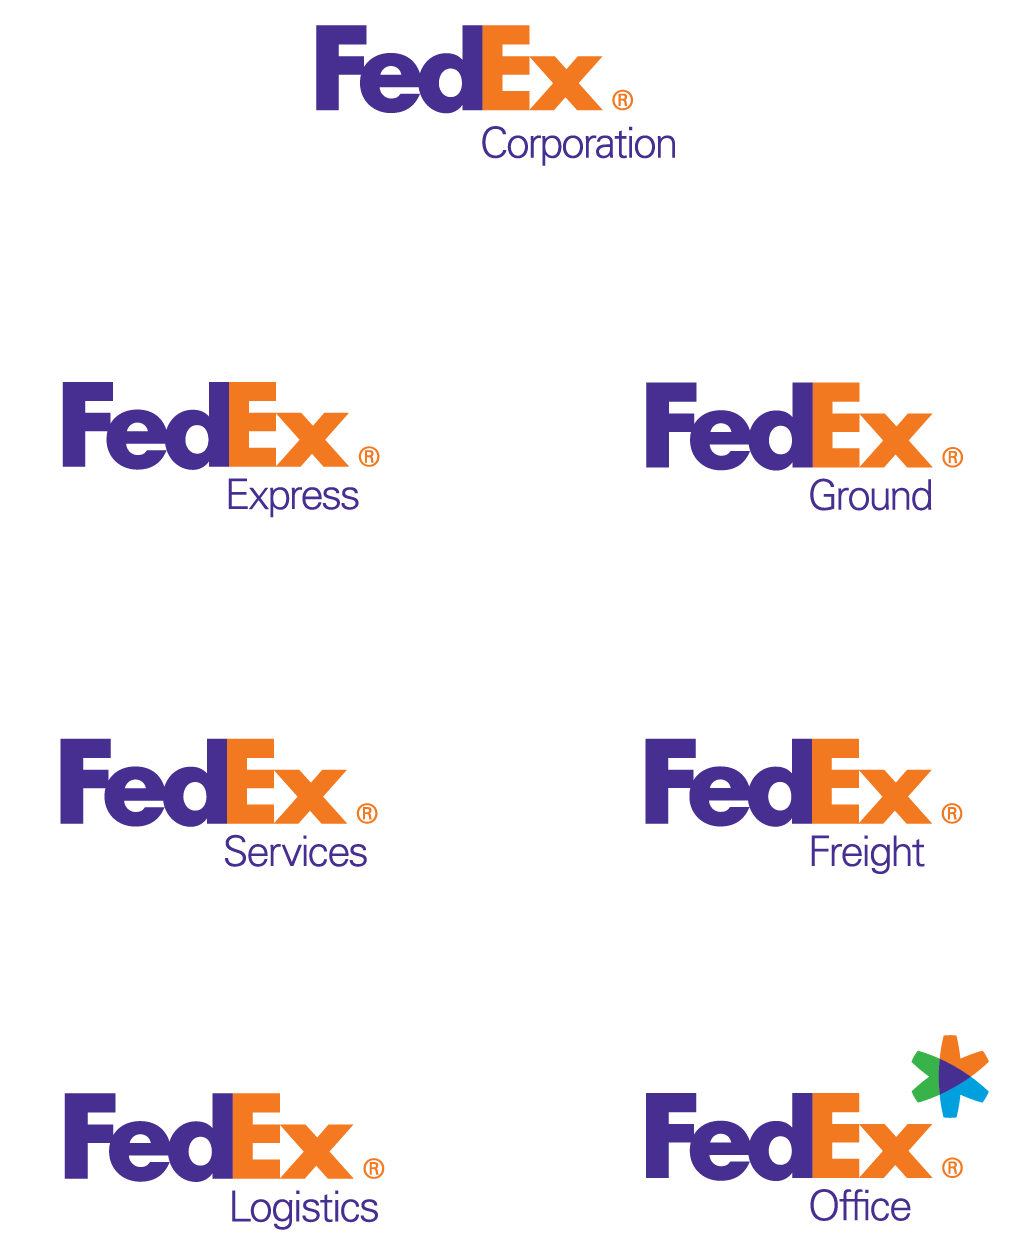 FedEx Freight New Logo - Company Structure and Facts - About FedEx